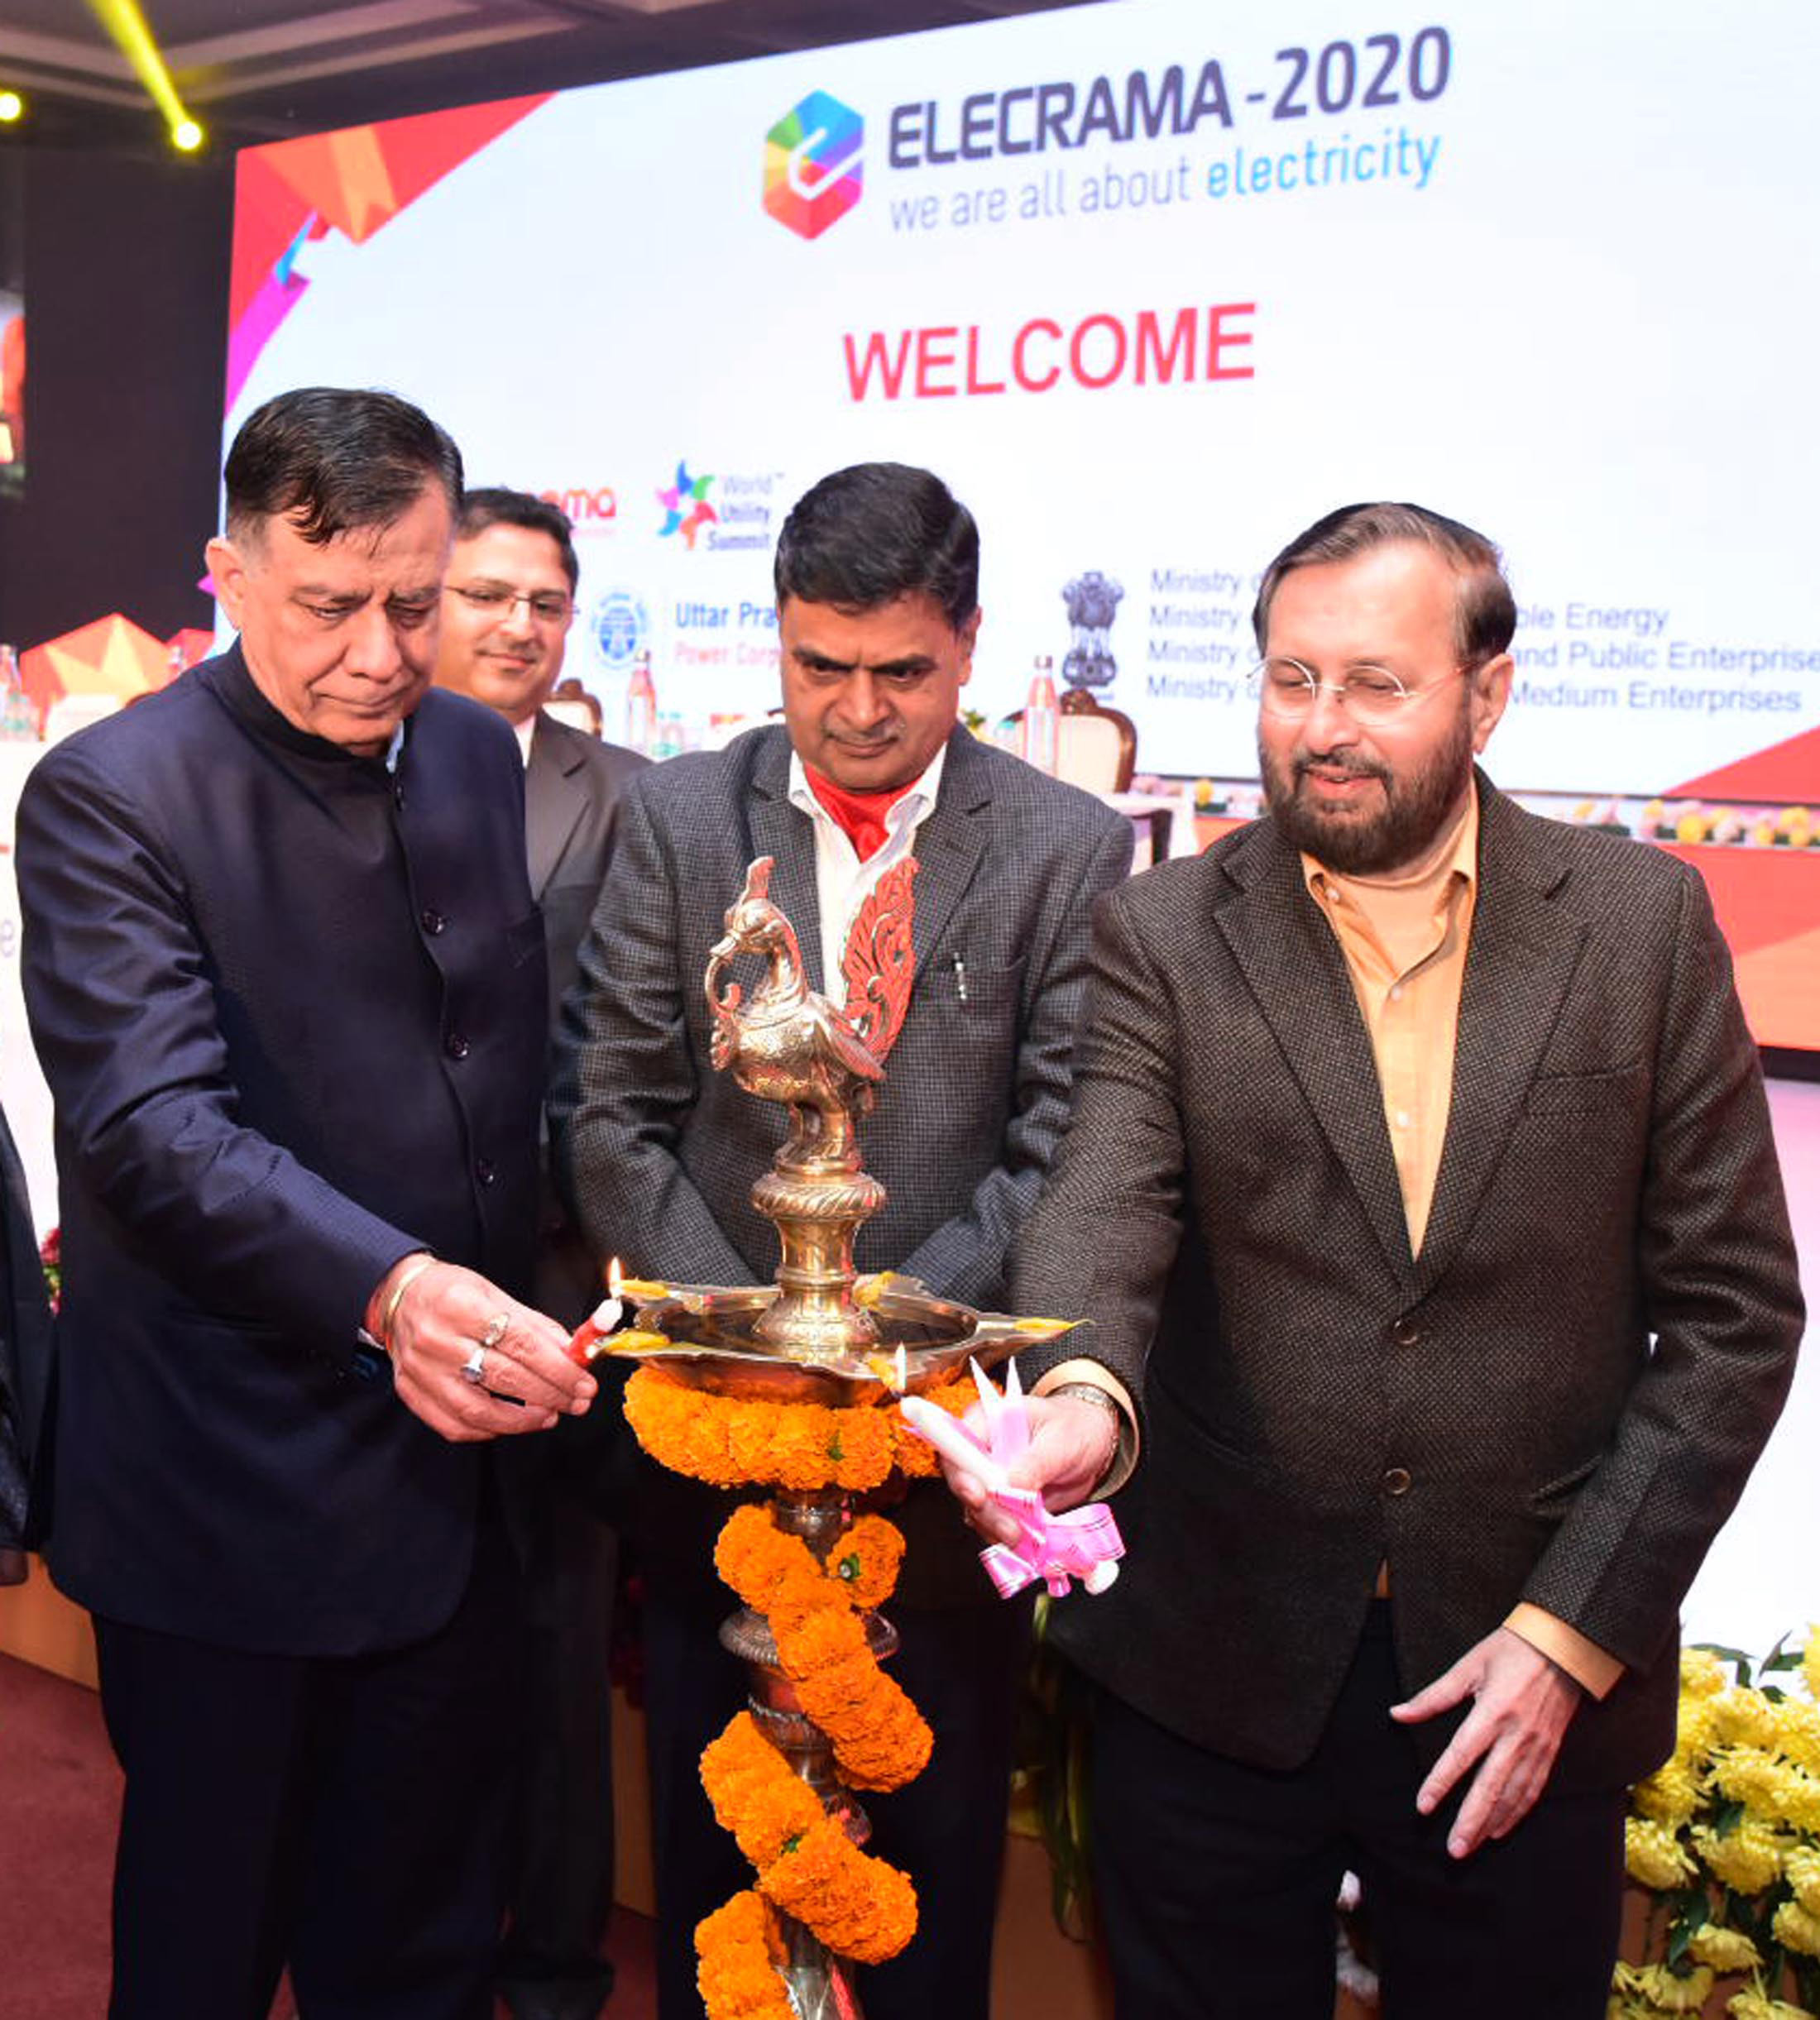 The Union Minister for Environment, Forest & Climate Change, Information & Broadcasting and Heavy Industries and Public Enterprise, Shri Prakash Javadekar lighting the lamp to inaugurate the Elecrama 2020, at India Expo Mart, in Greater Noida on January 18, 2020. The Minister of State for Power, New & Renewable Energy (Independent Charge) and Skill Development & Entrepreneurship, Shri Raj Kumar Singh is also seen.